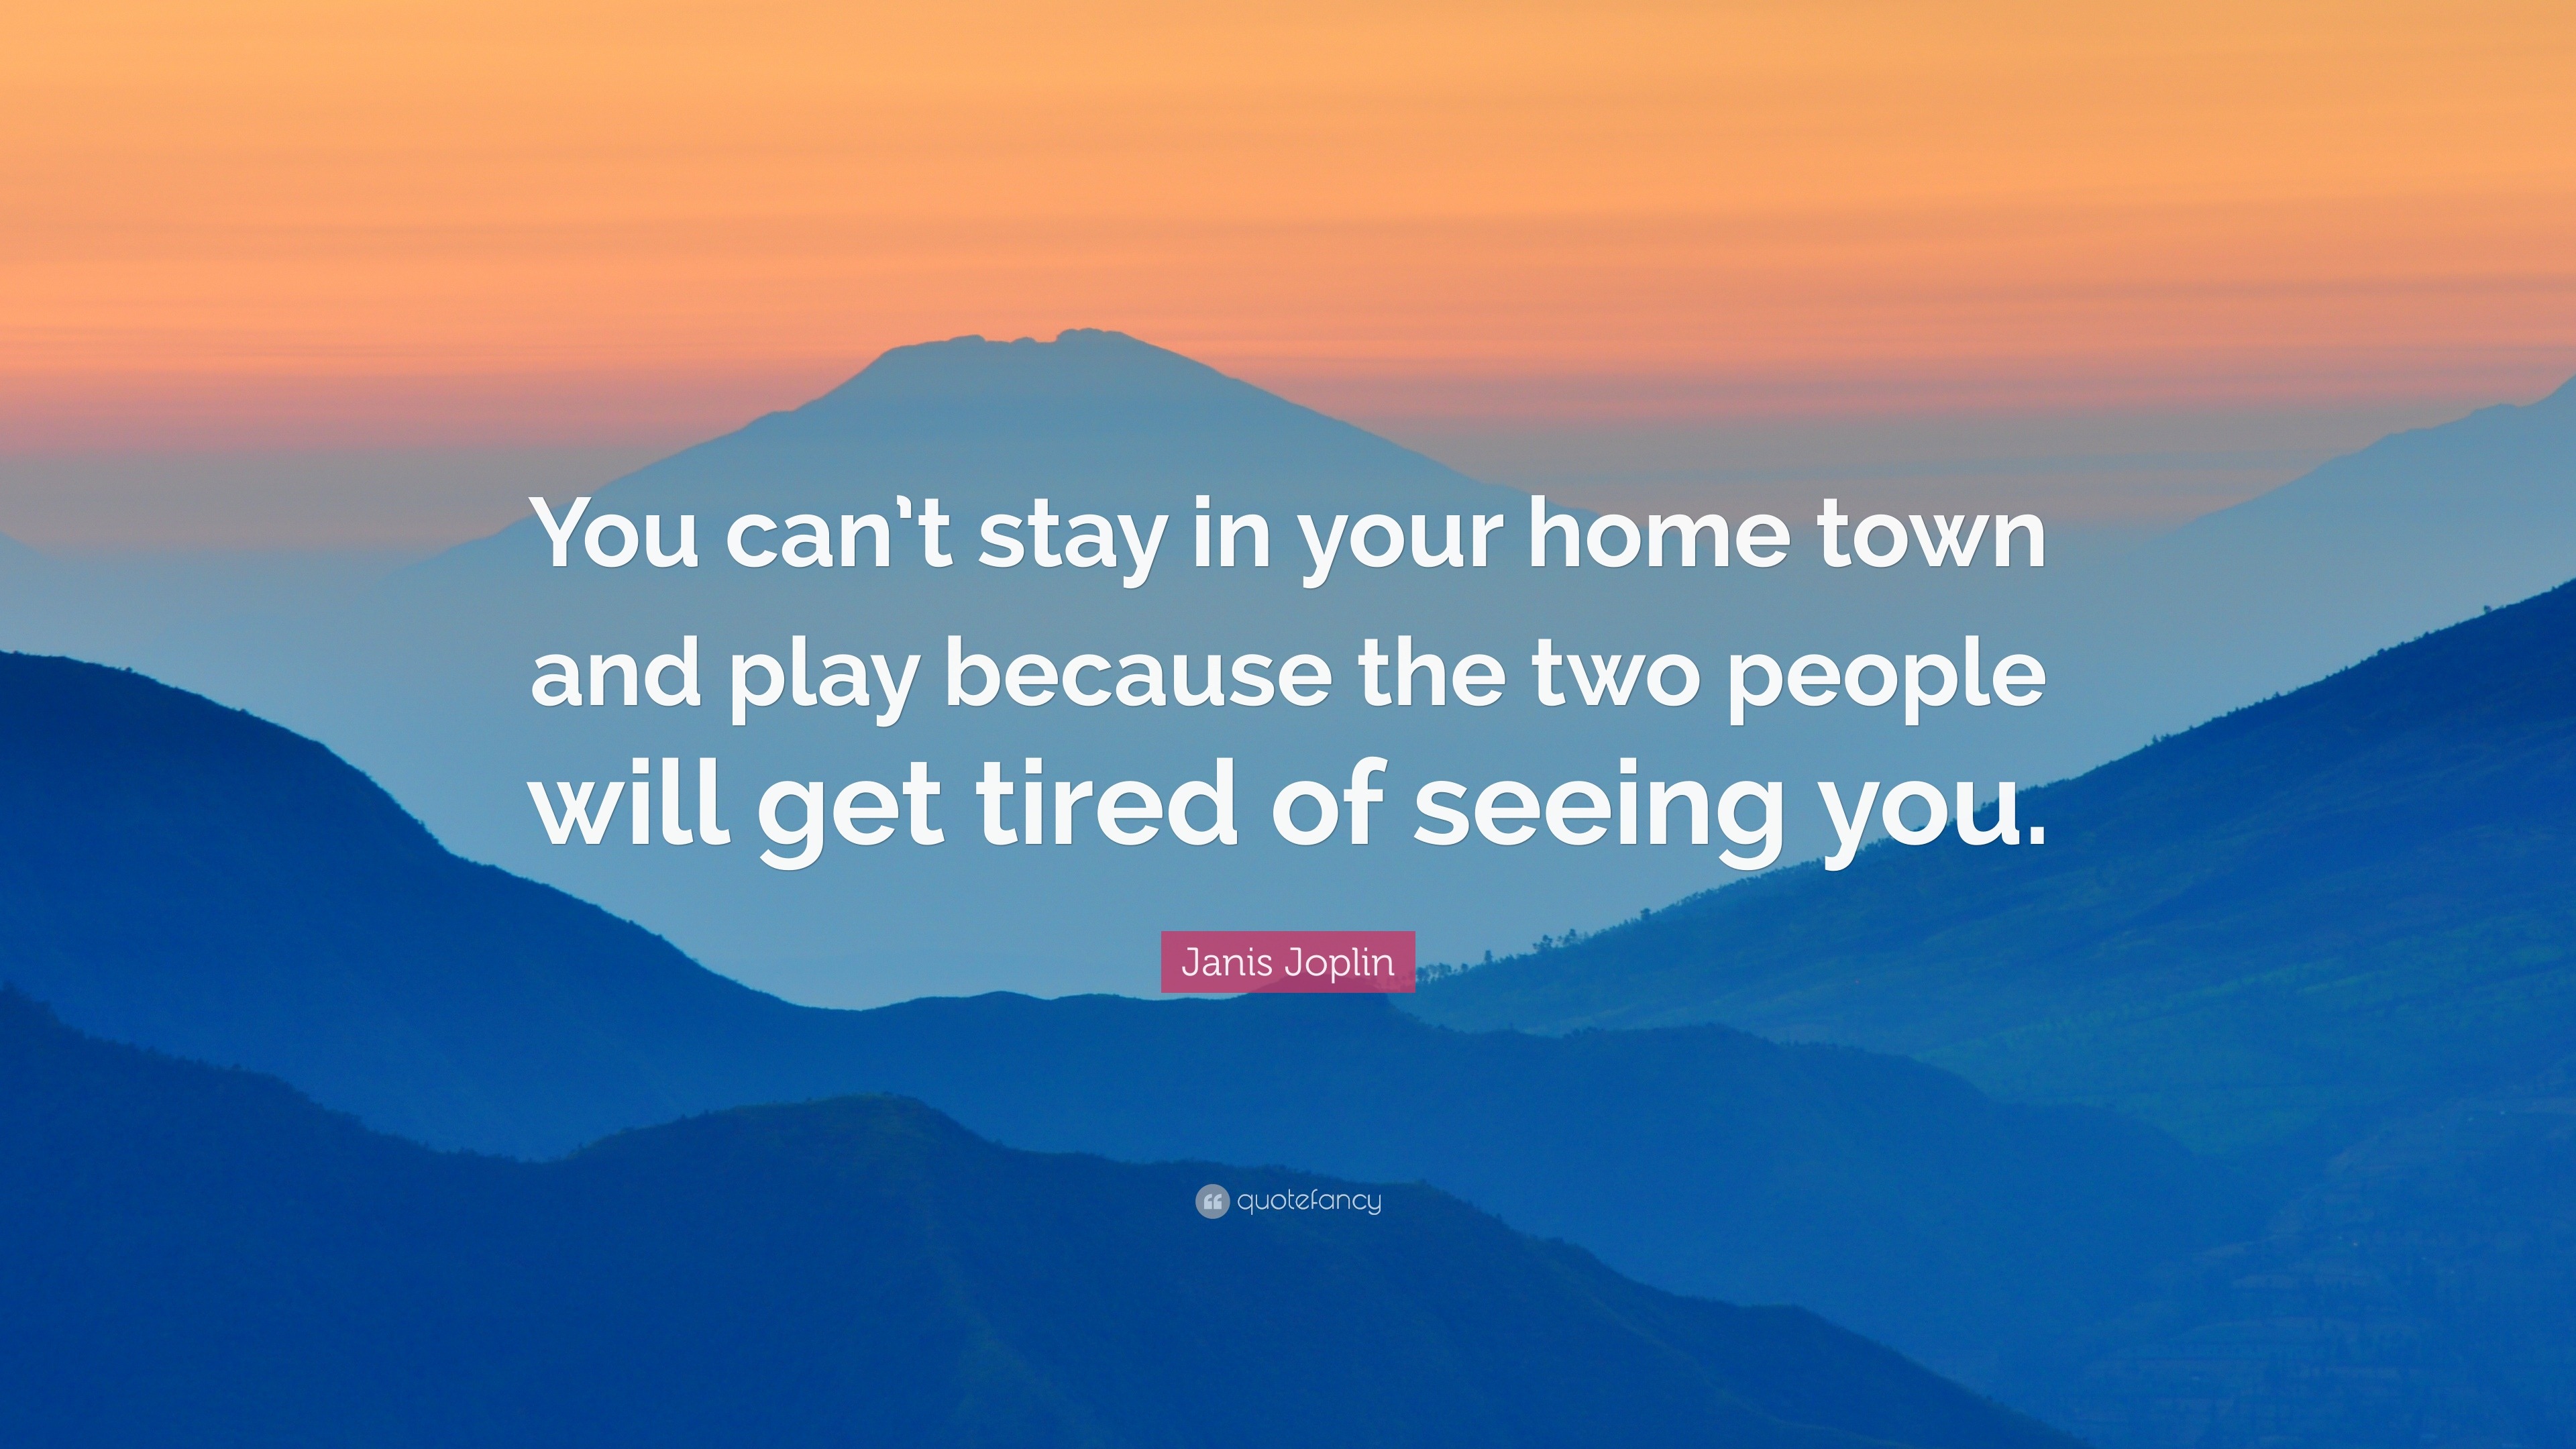 Janis Joplin Quote: "You can't stay in your home town and play because the two people will get ...